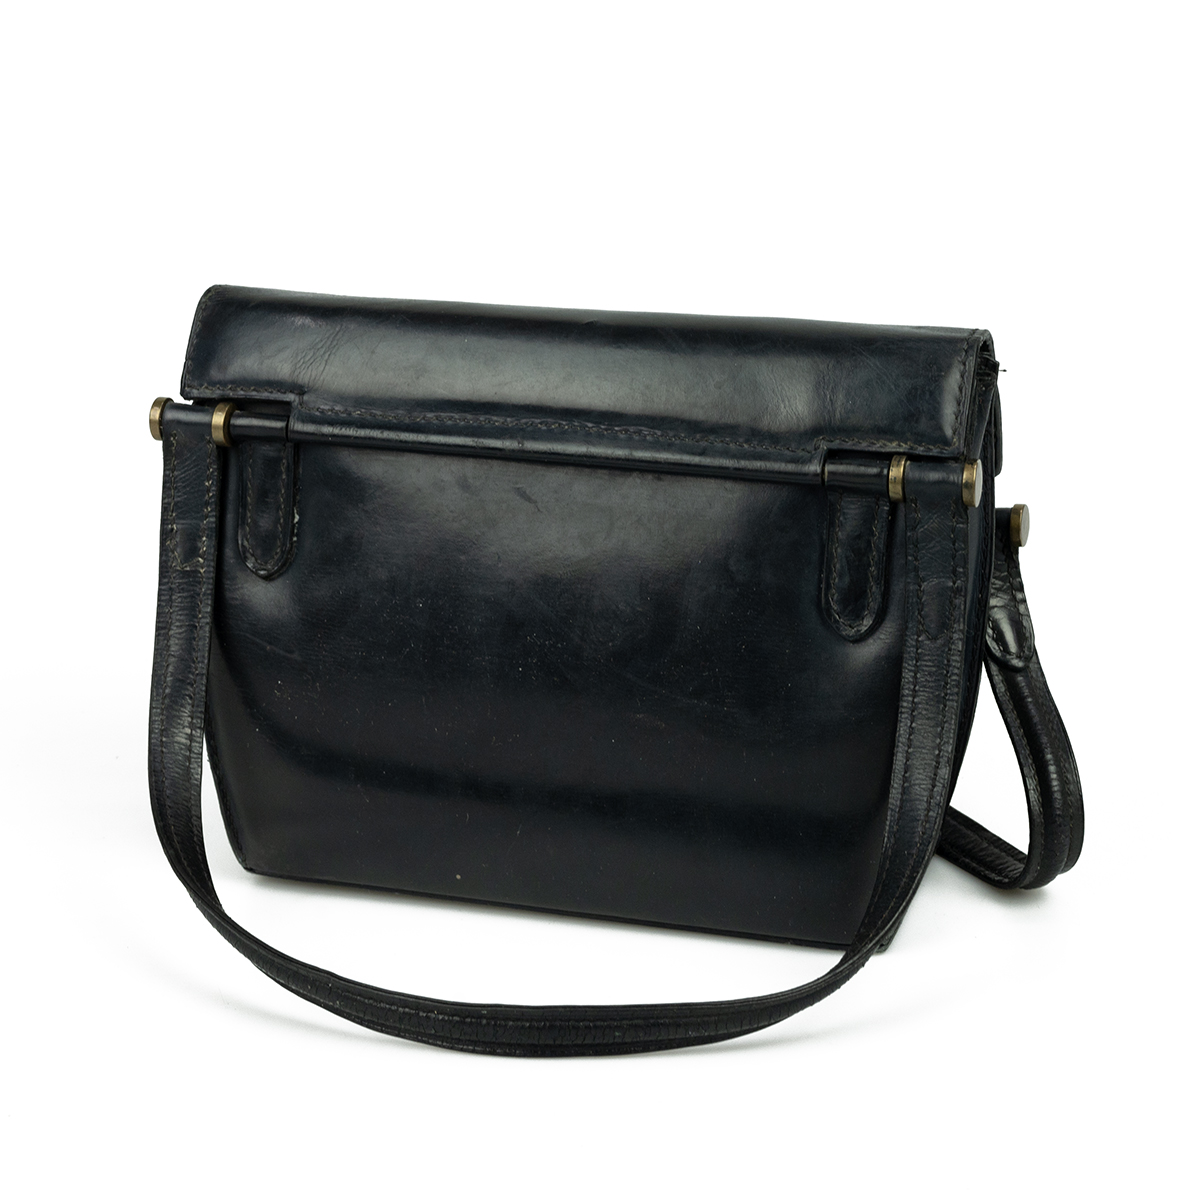 Circa 1980s vintage Gucci black leather handbag, with gold-tone hardware, single handle, leather ... - Image 9 of 9